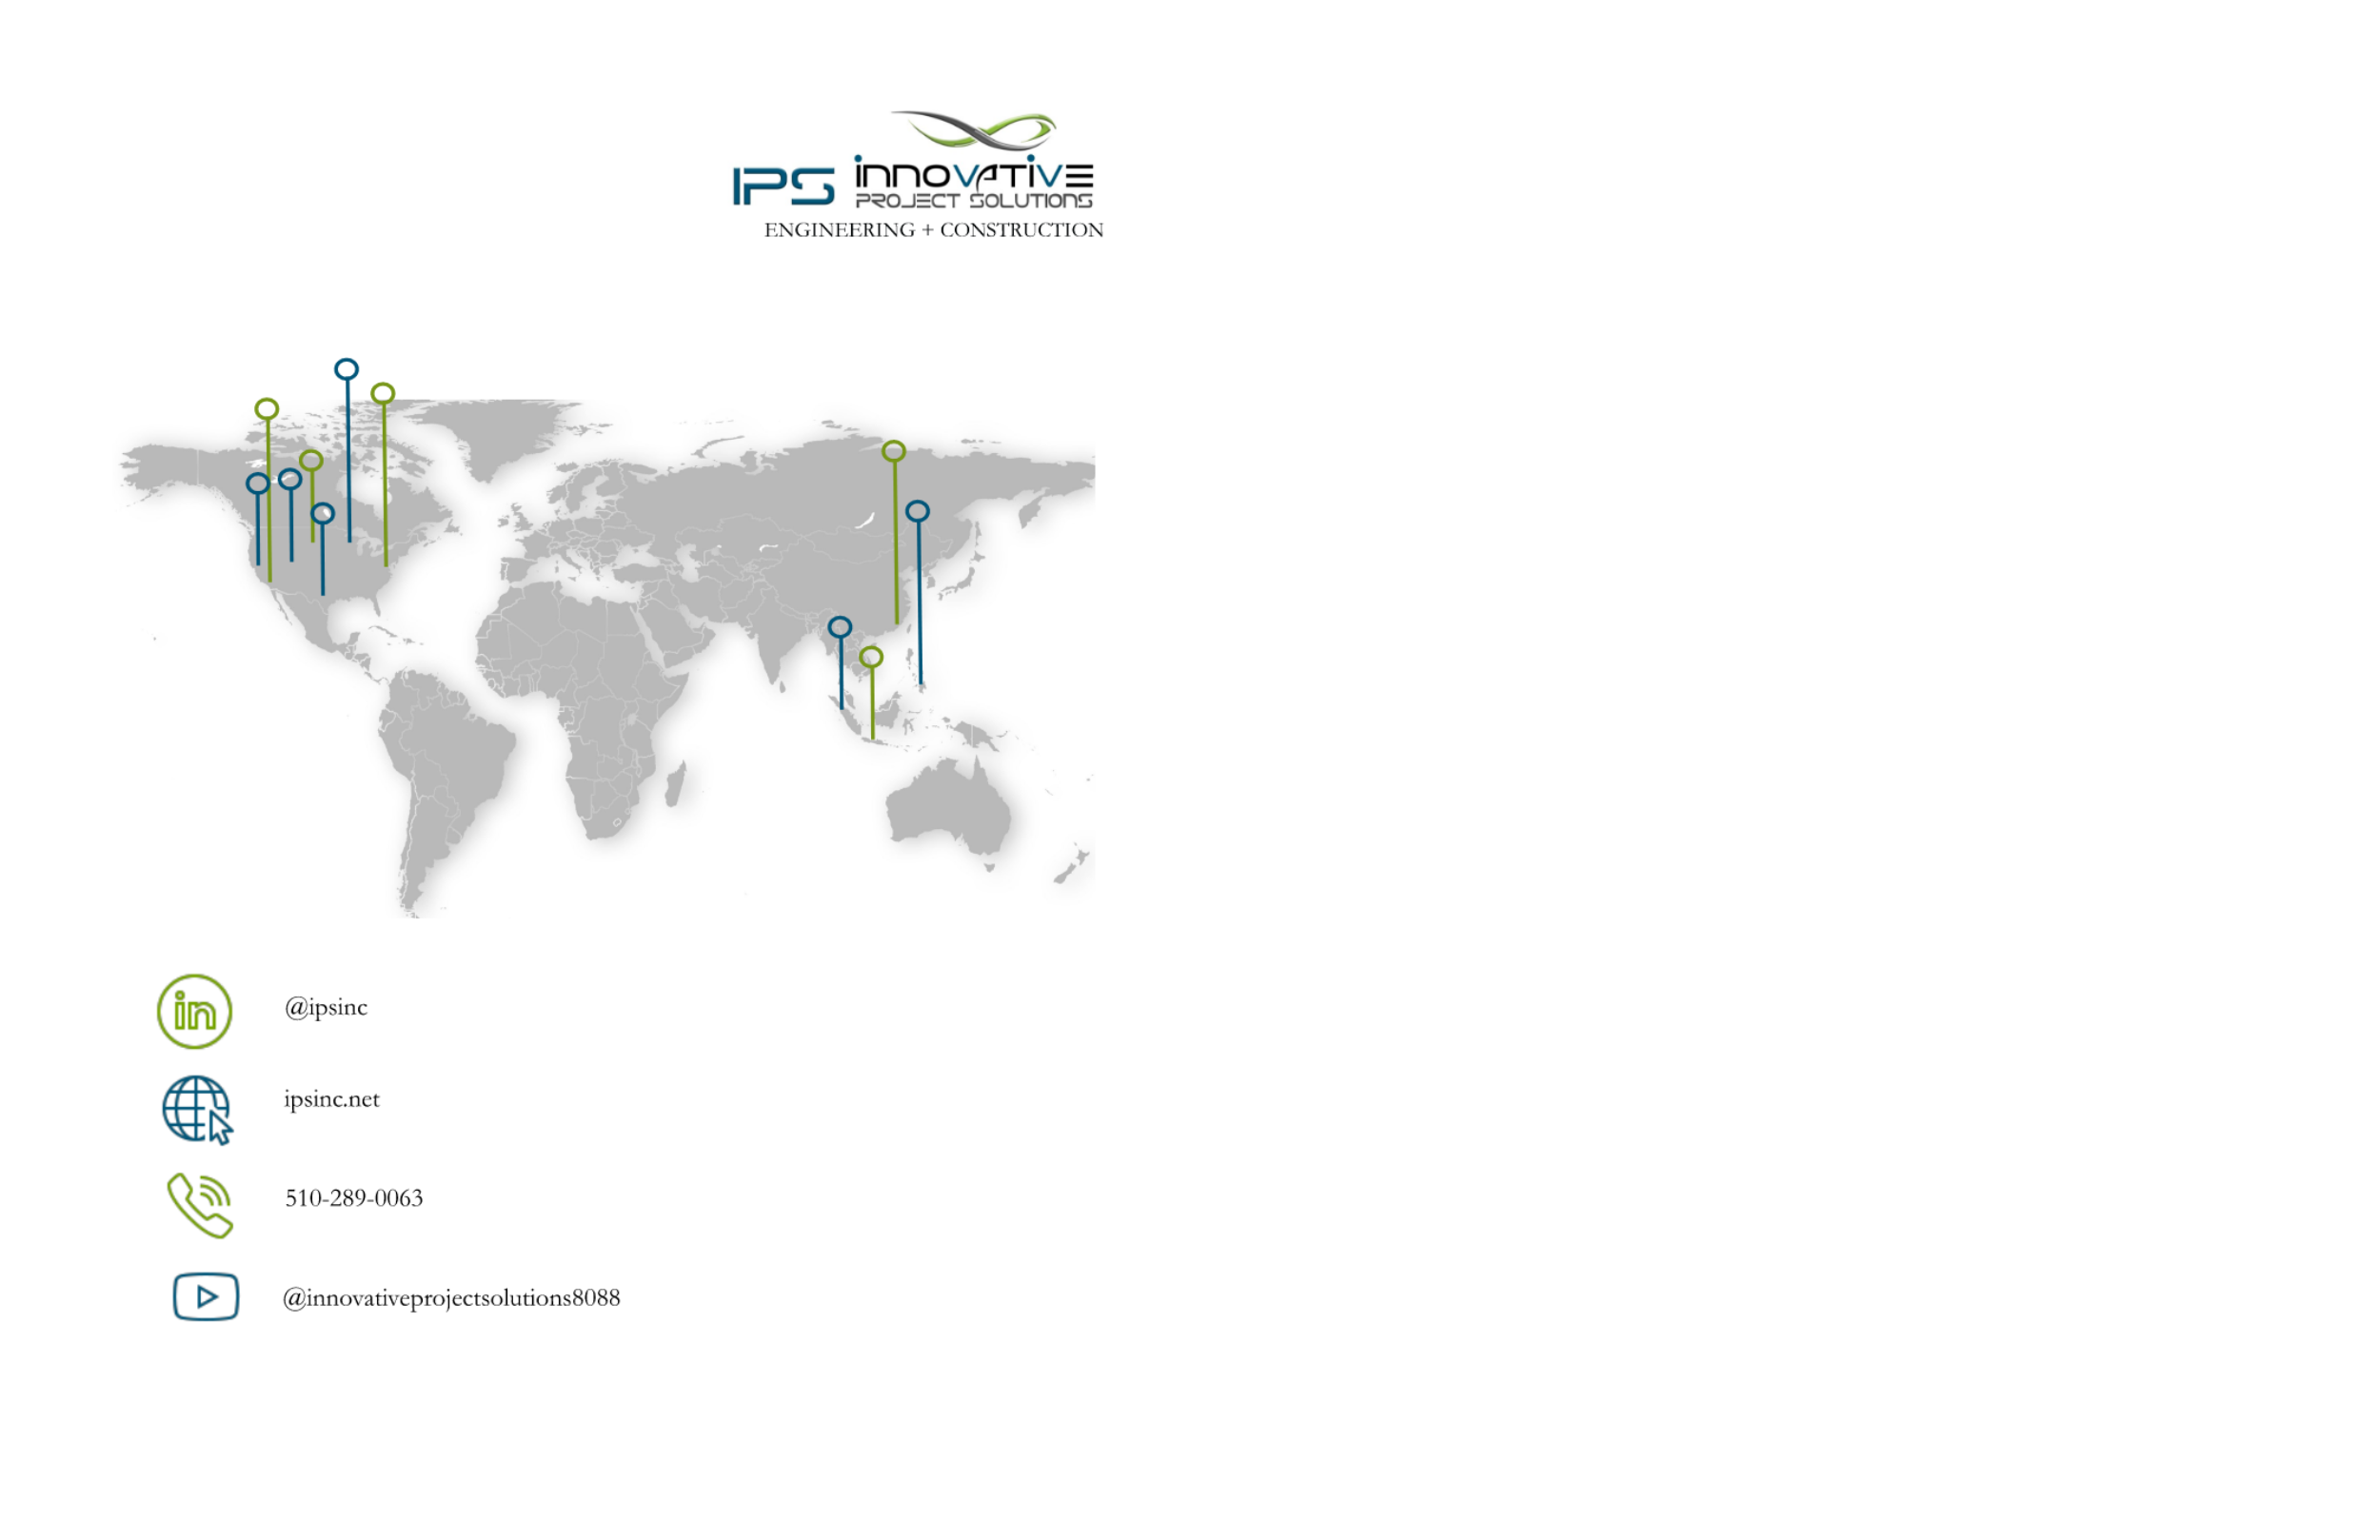 IPS Capabilities Booklet back cover with contact information and office locations.